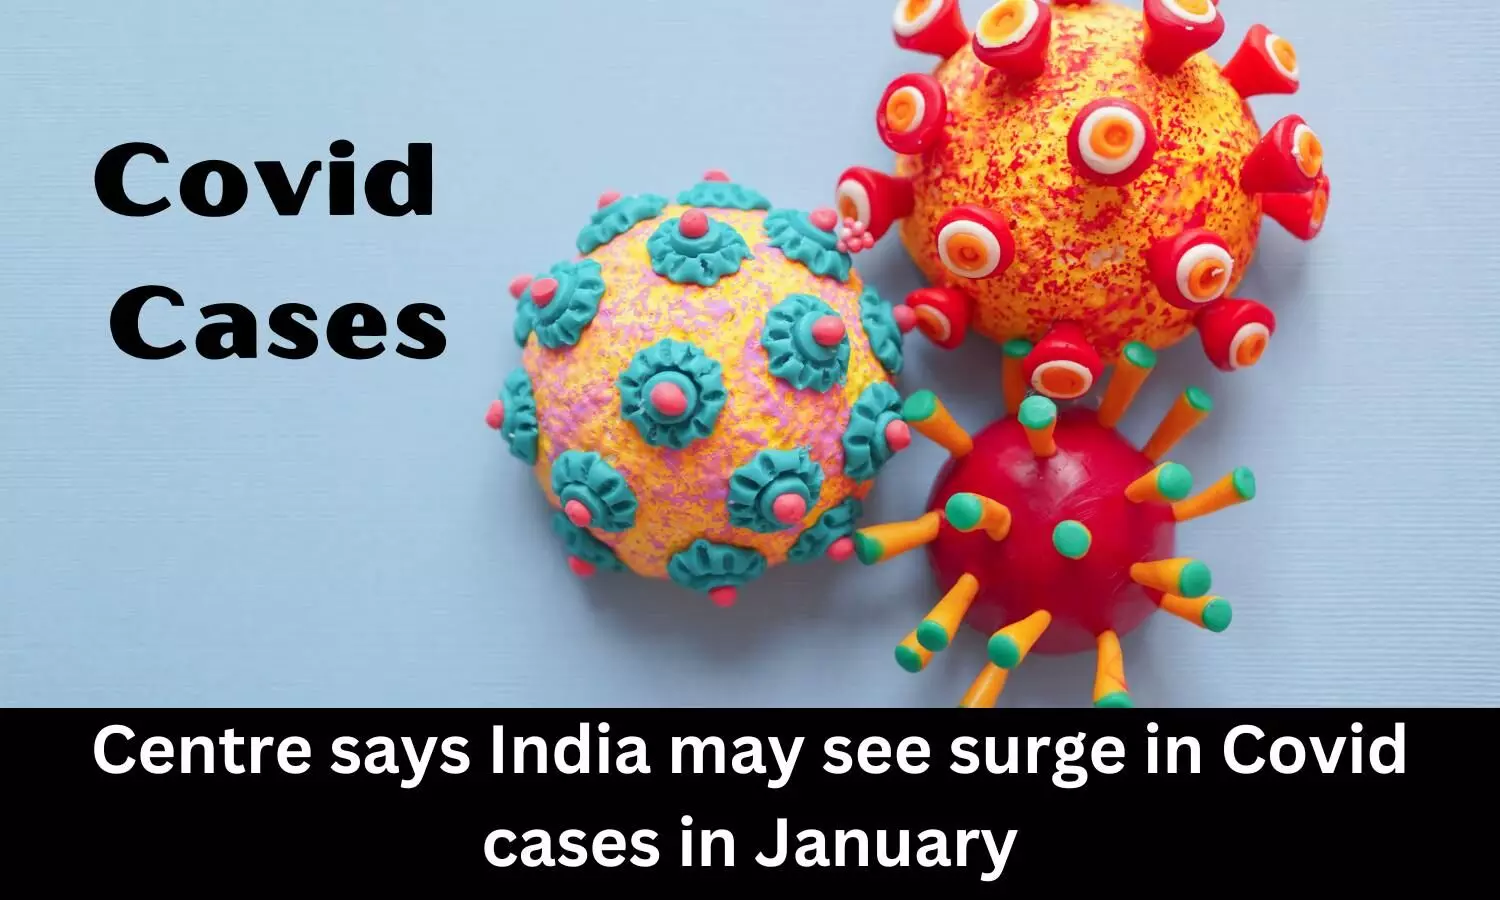 Centre says India may see surge in Covid cases in January